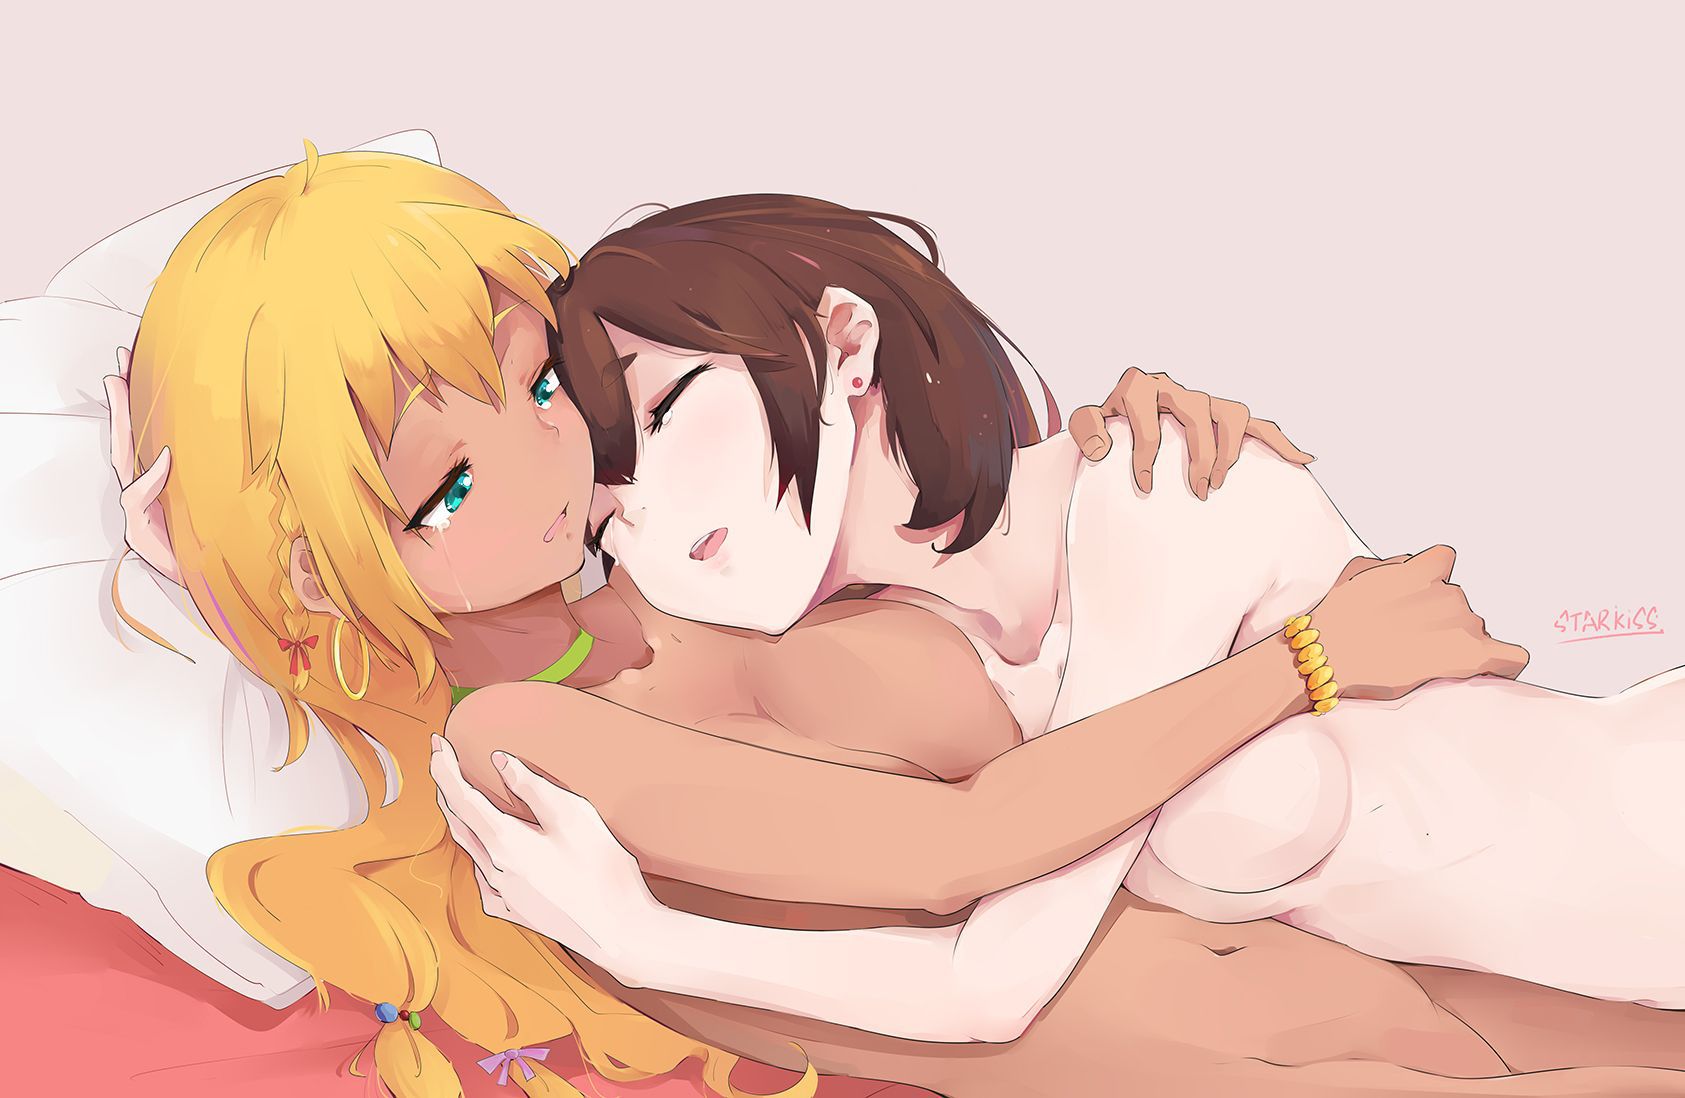 [secondary/ZIP] lovely yuri Lesbian image of a cute girl each other 29